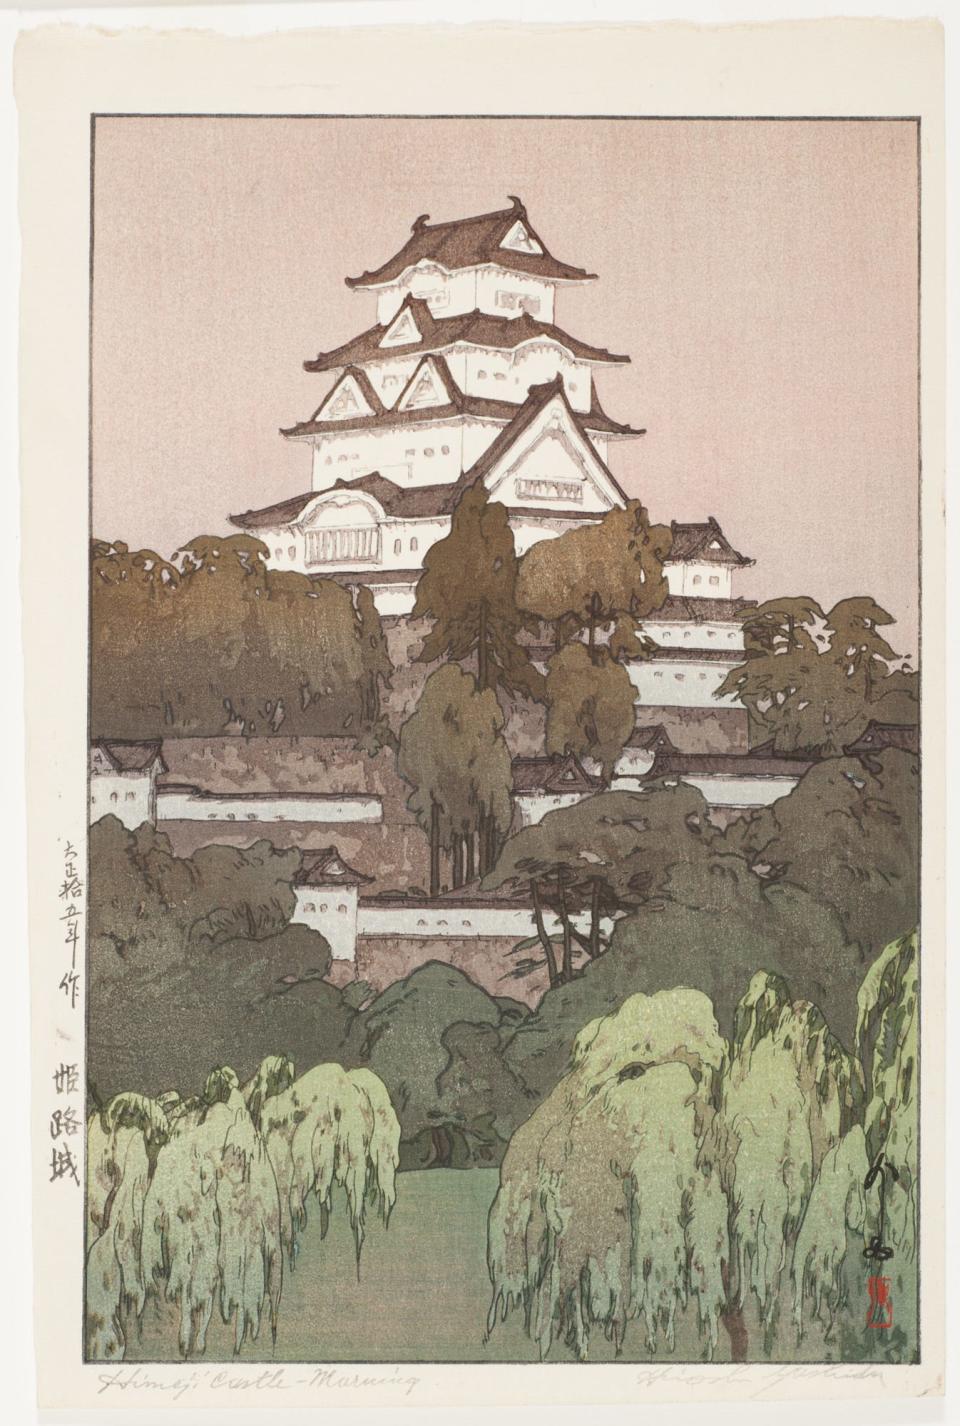 Three Generations of Japanese Printmakers: The Yoshida Family Legacy opens Dec. 13 at the Cincinnati Art Museum. Pictured: "Himeji Castle in the Morning" by Yoshida Hiroshi (Japanese, 1876–1950). The Howard and Caroline Porter Collection